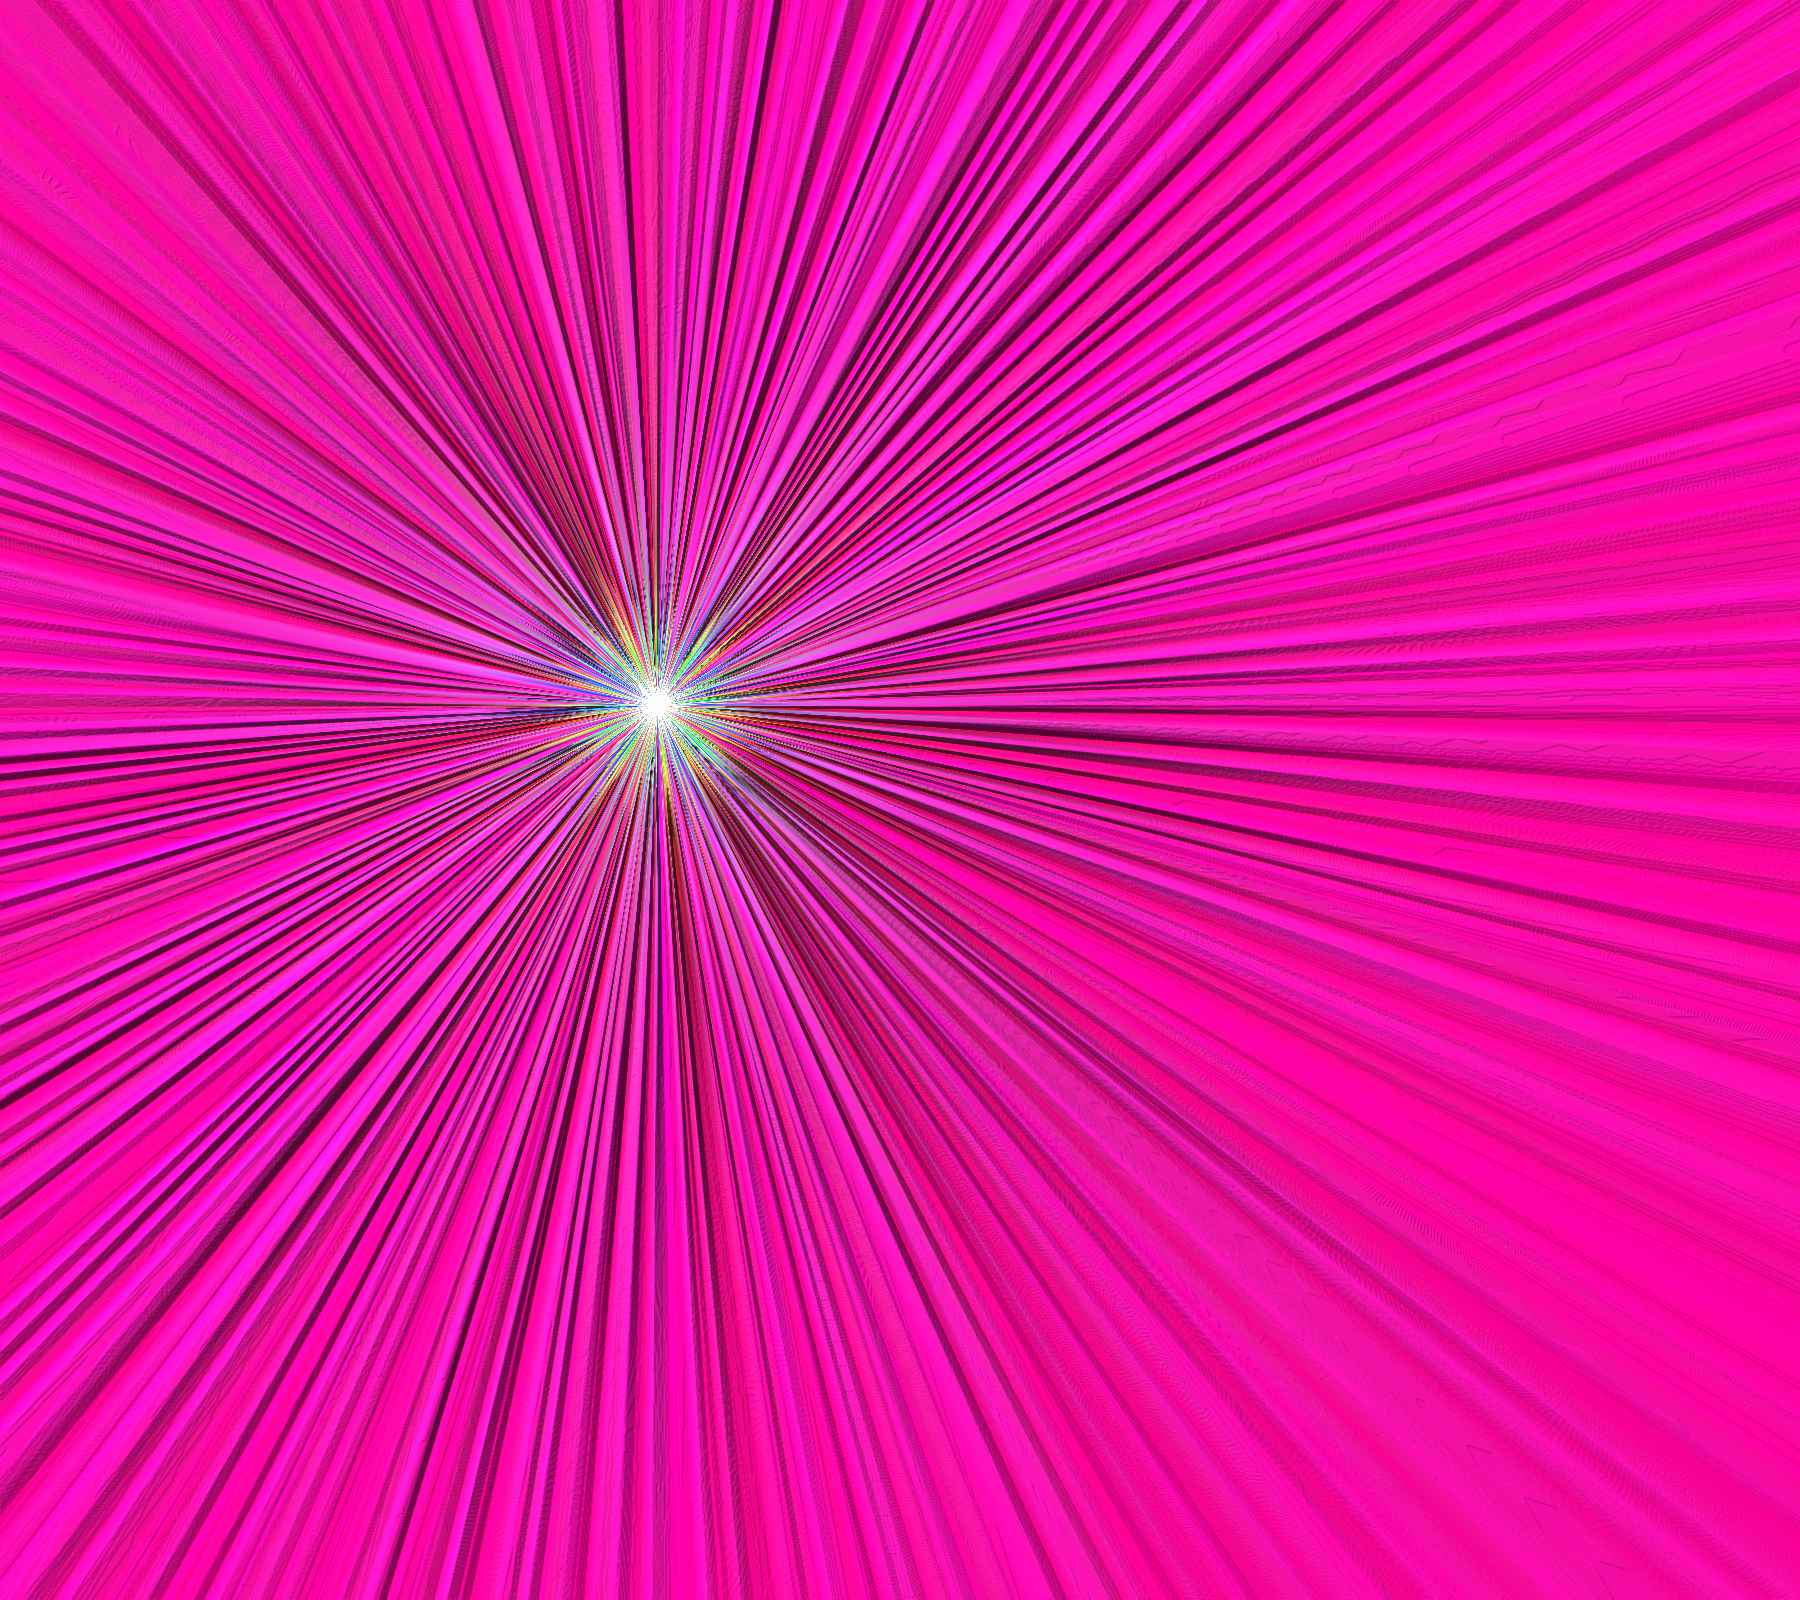 Wallpaper For > Hot Pink Diamond Background